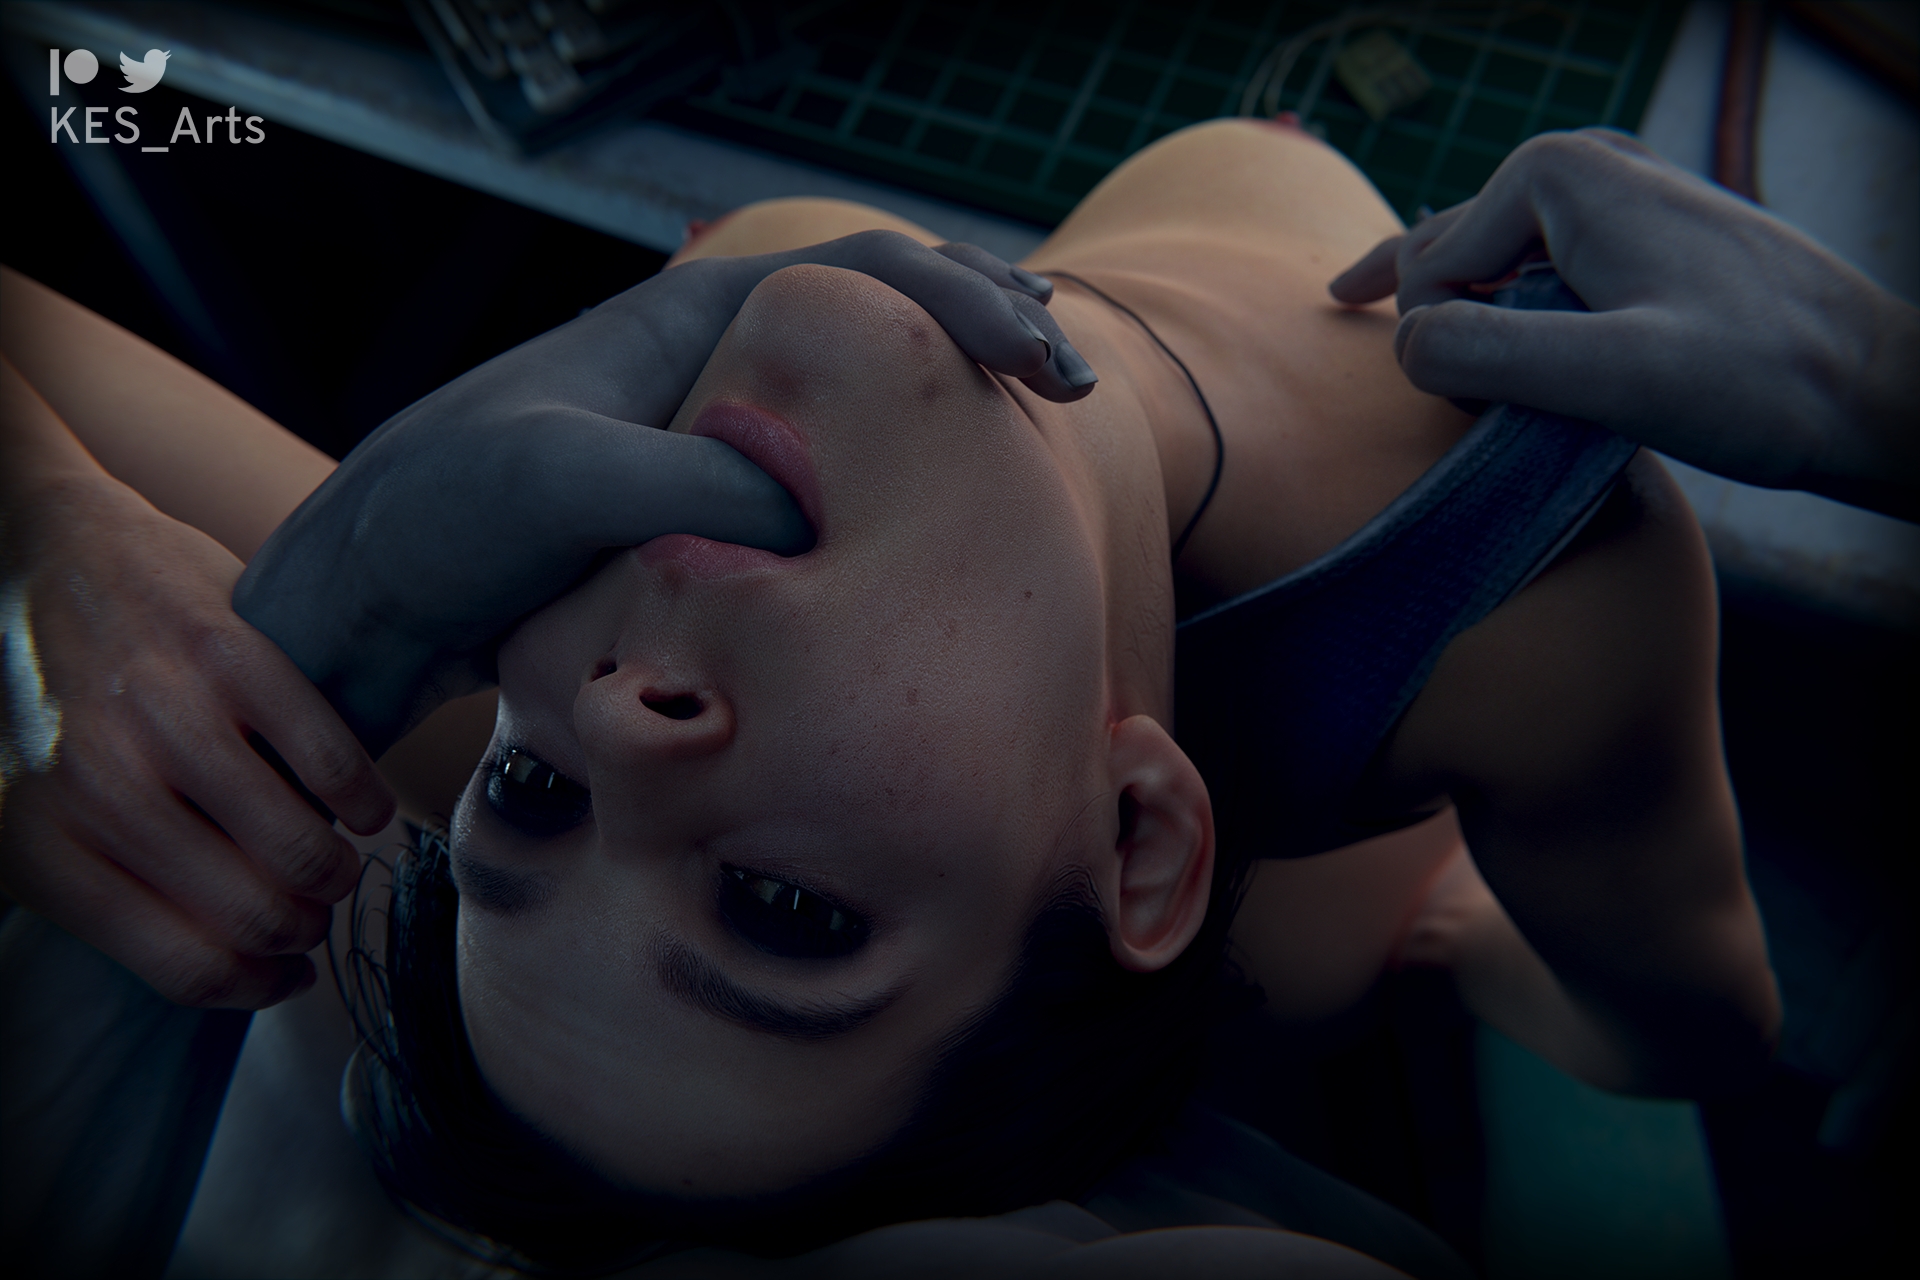 JILL SATIFIED BY ZOMBIE Resident Evil Resident Evil 3 Remake Jill Valentine Zombie Fingering Licking Natural Boobs Breasts Exposed